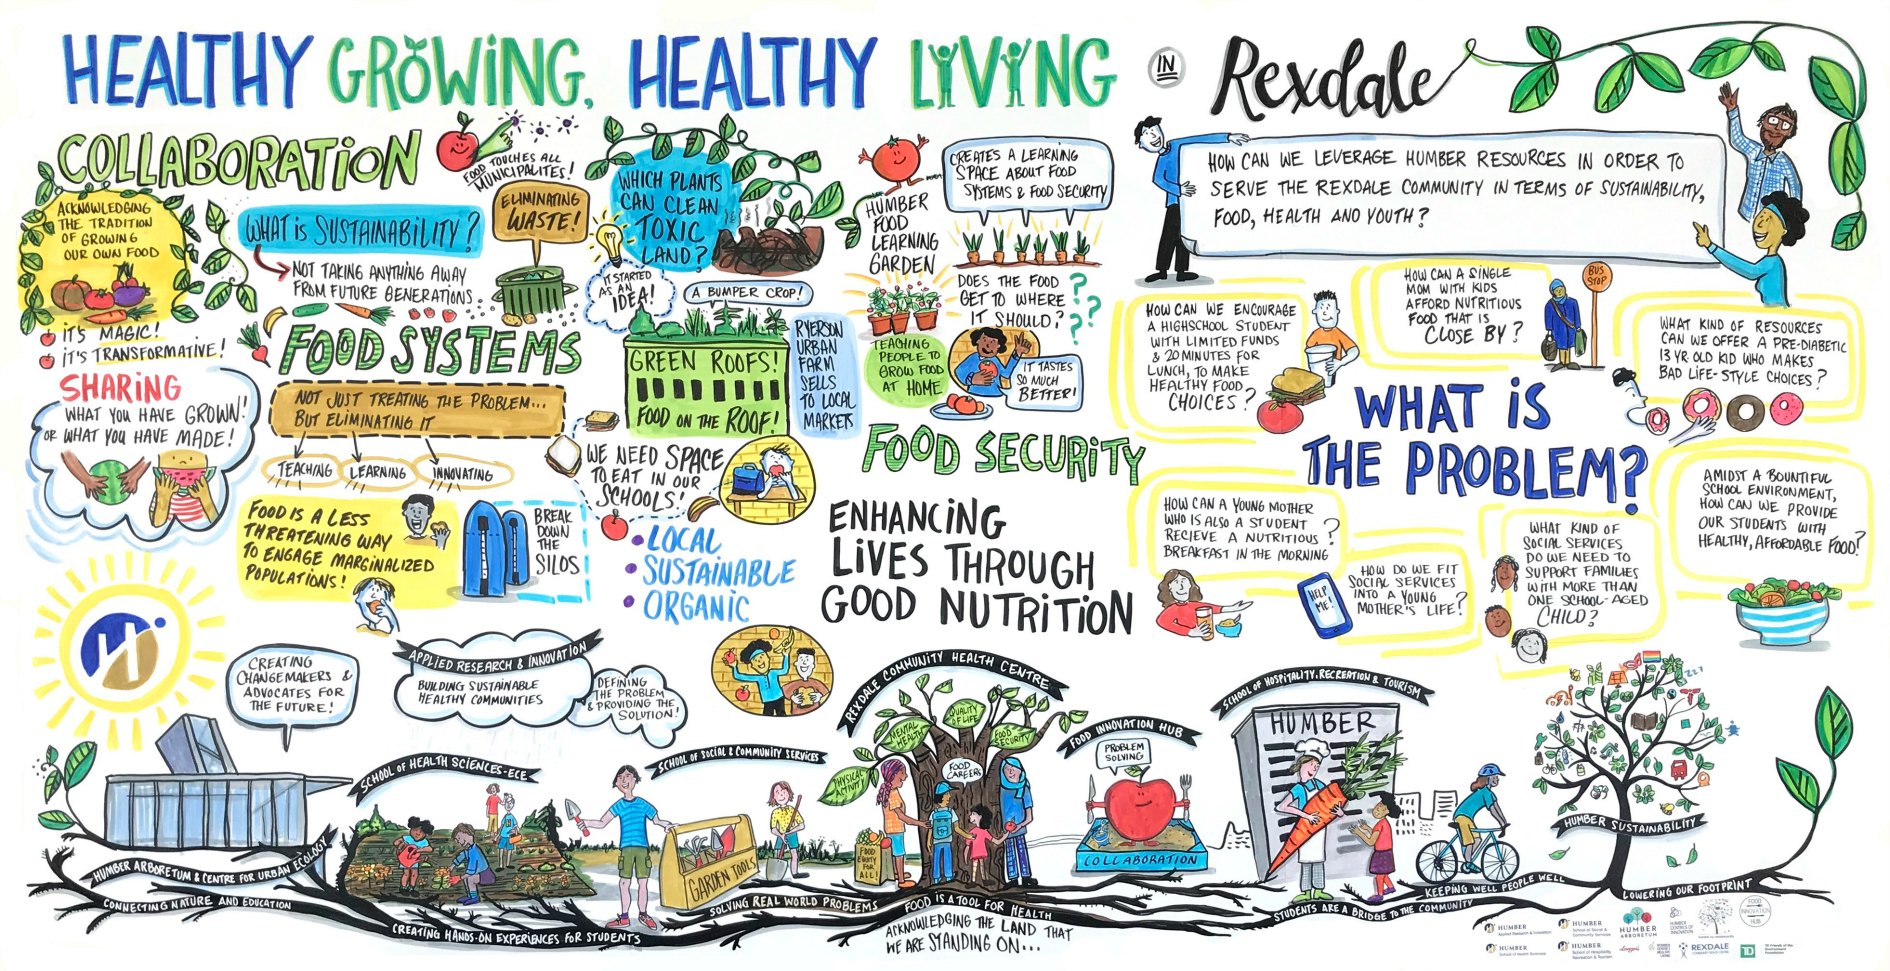 Illustrations and text on a white board outline thoughts around food and community